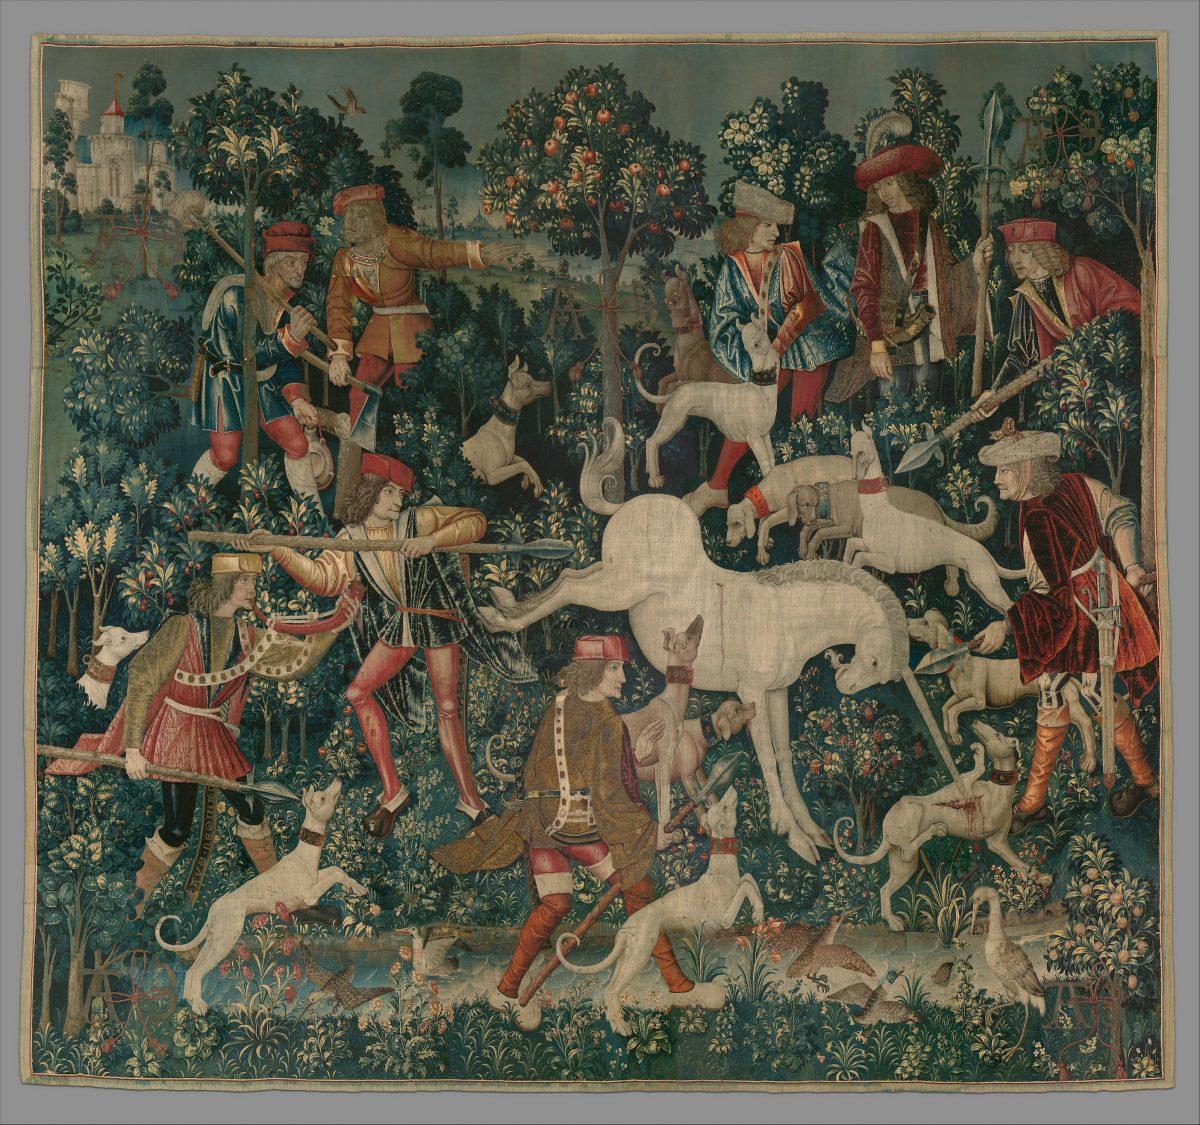 “The Unicorn Defends Itself,” 1495–1505, South Netherlandish. Wool warp with wool, silk, silver, and gilt wefts; 145 inches by 158 inches. Gift of John D. Rockefeller Jr., 1937, The Met Cloisters. (The Metropolitan Museum of Art )